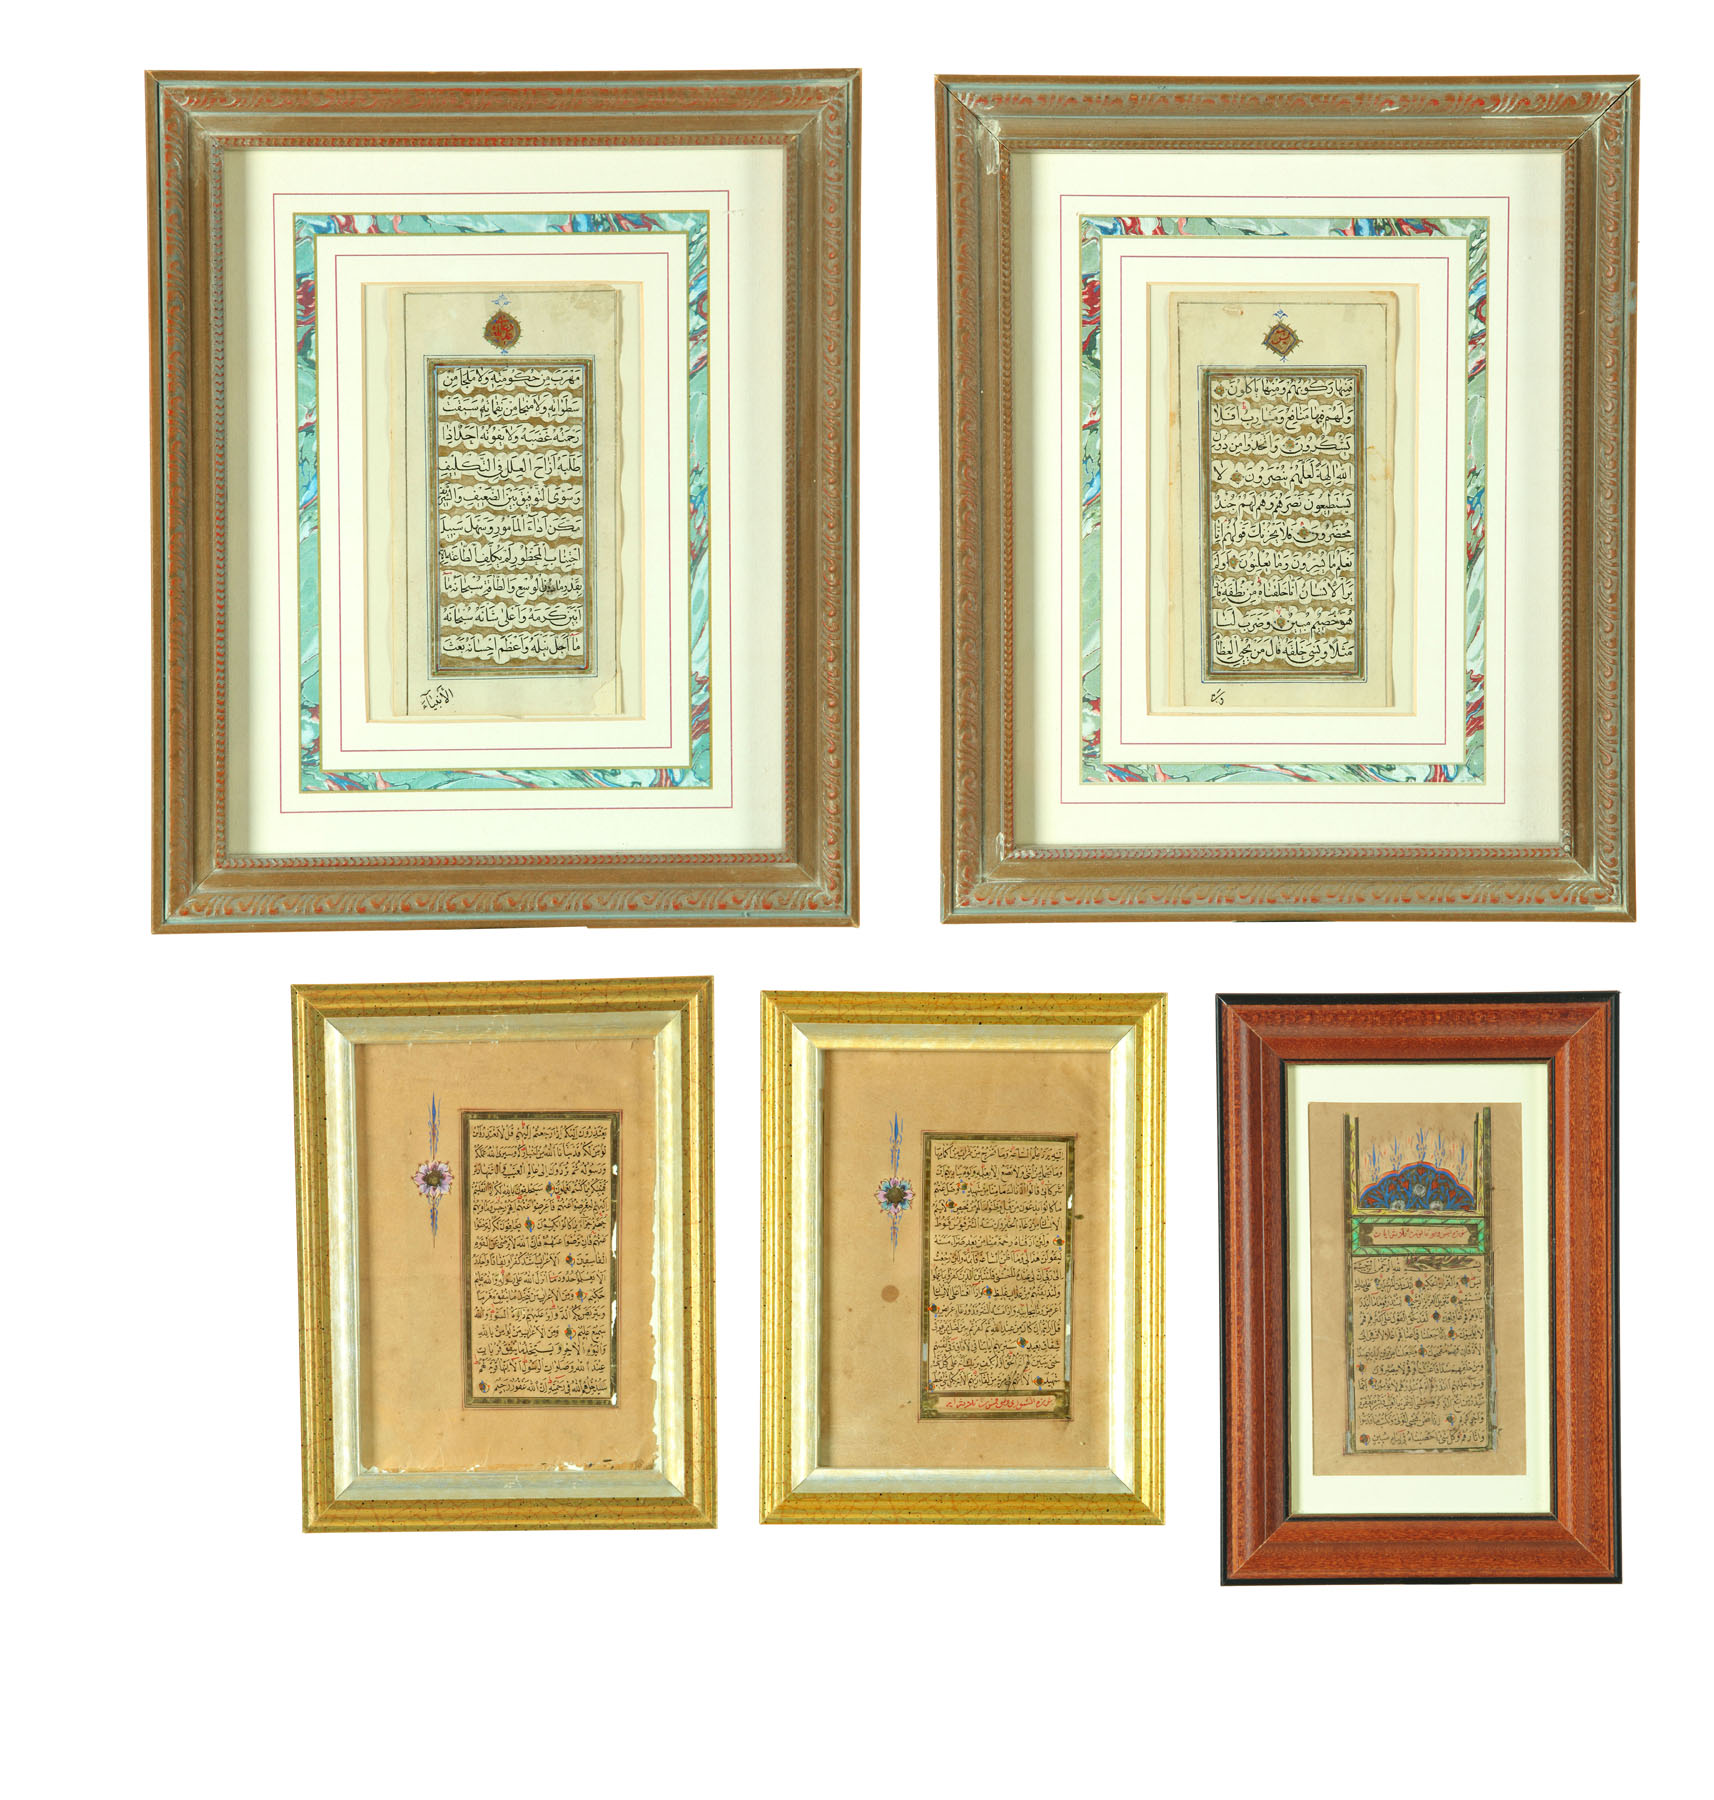 FIVE MANUSCRIPTS.  Middle East  19th